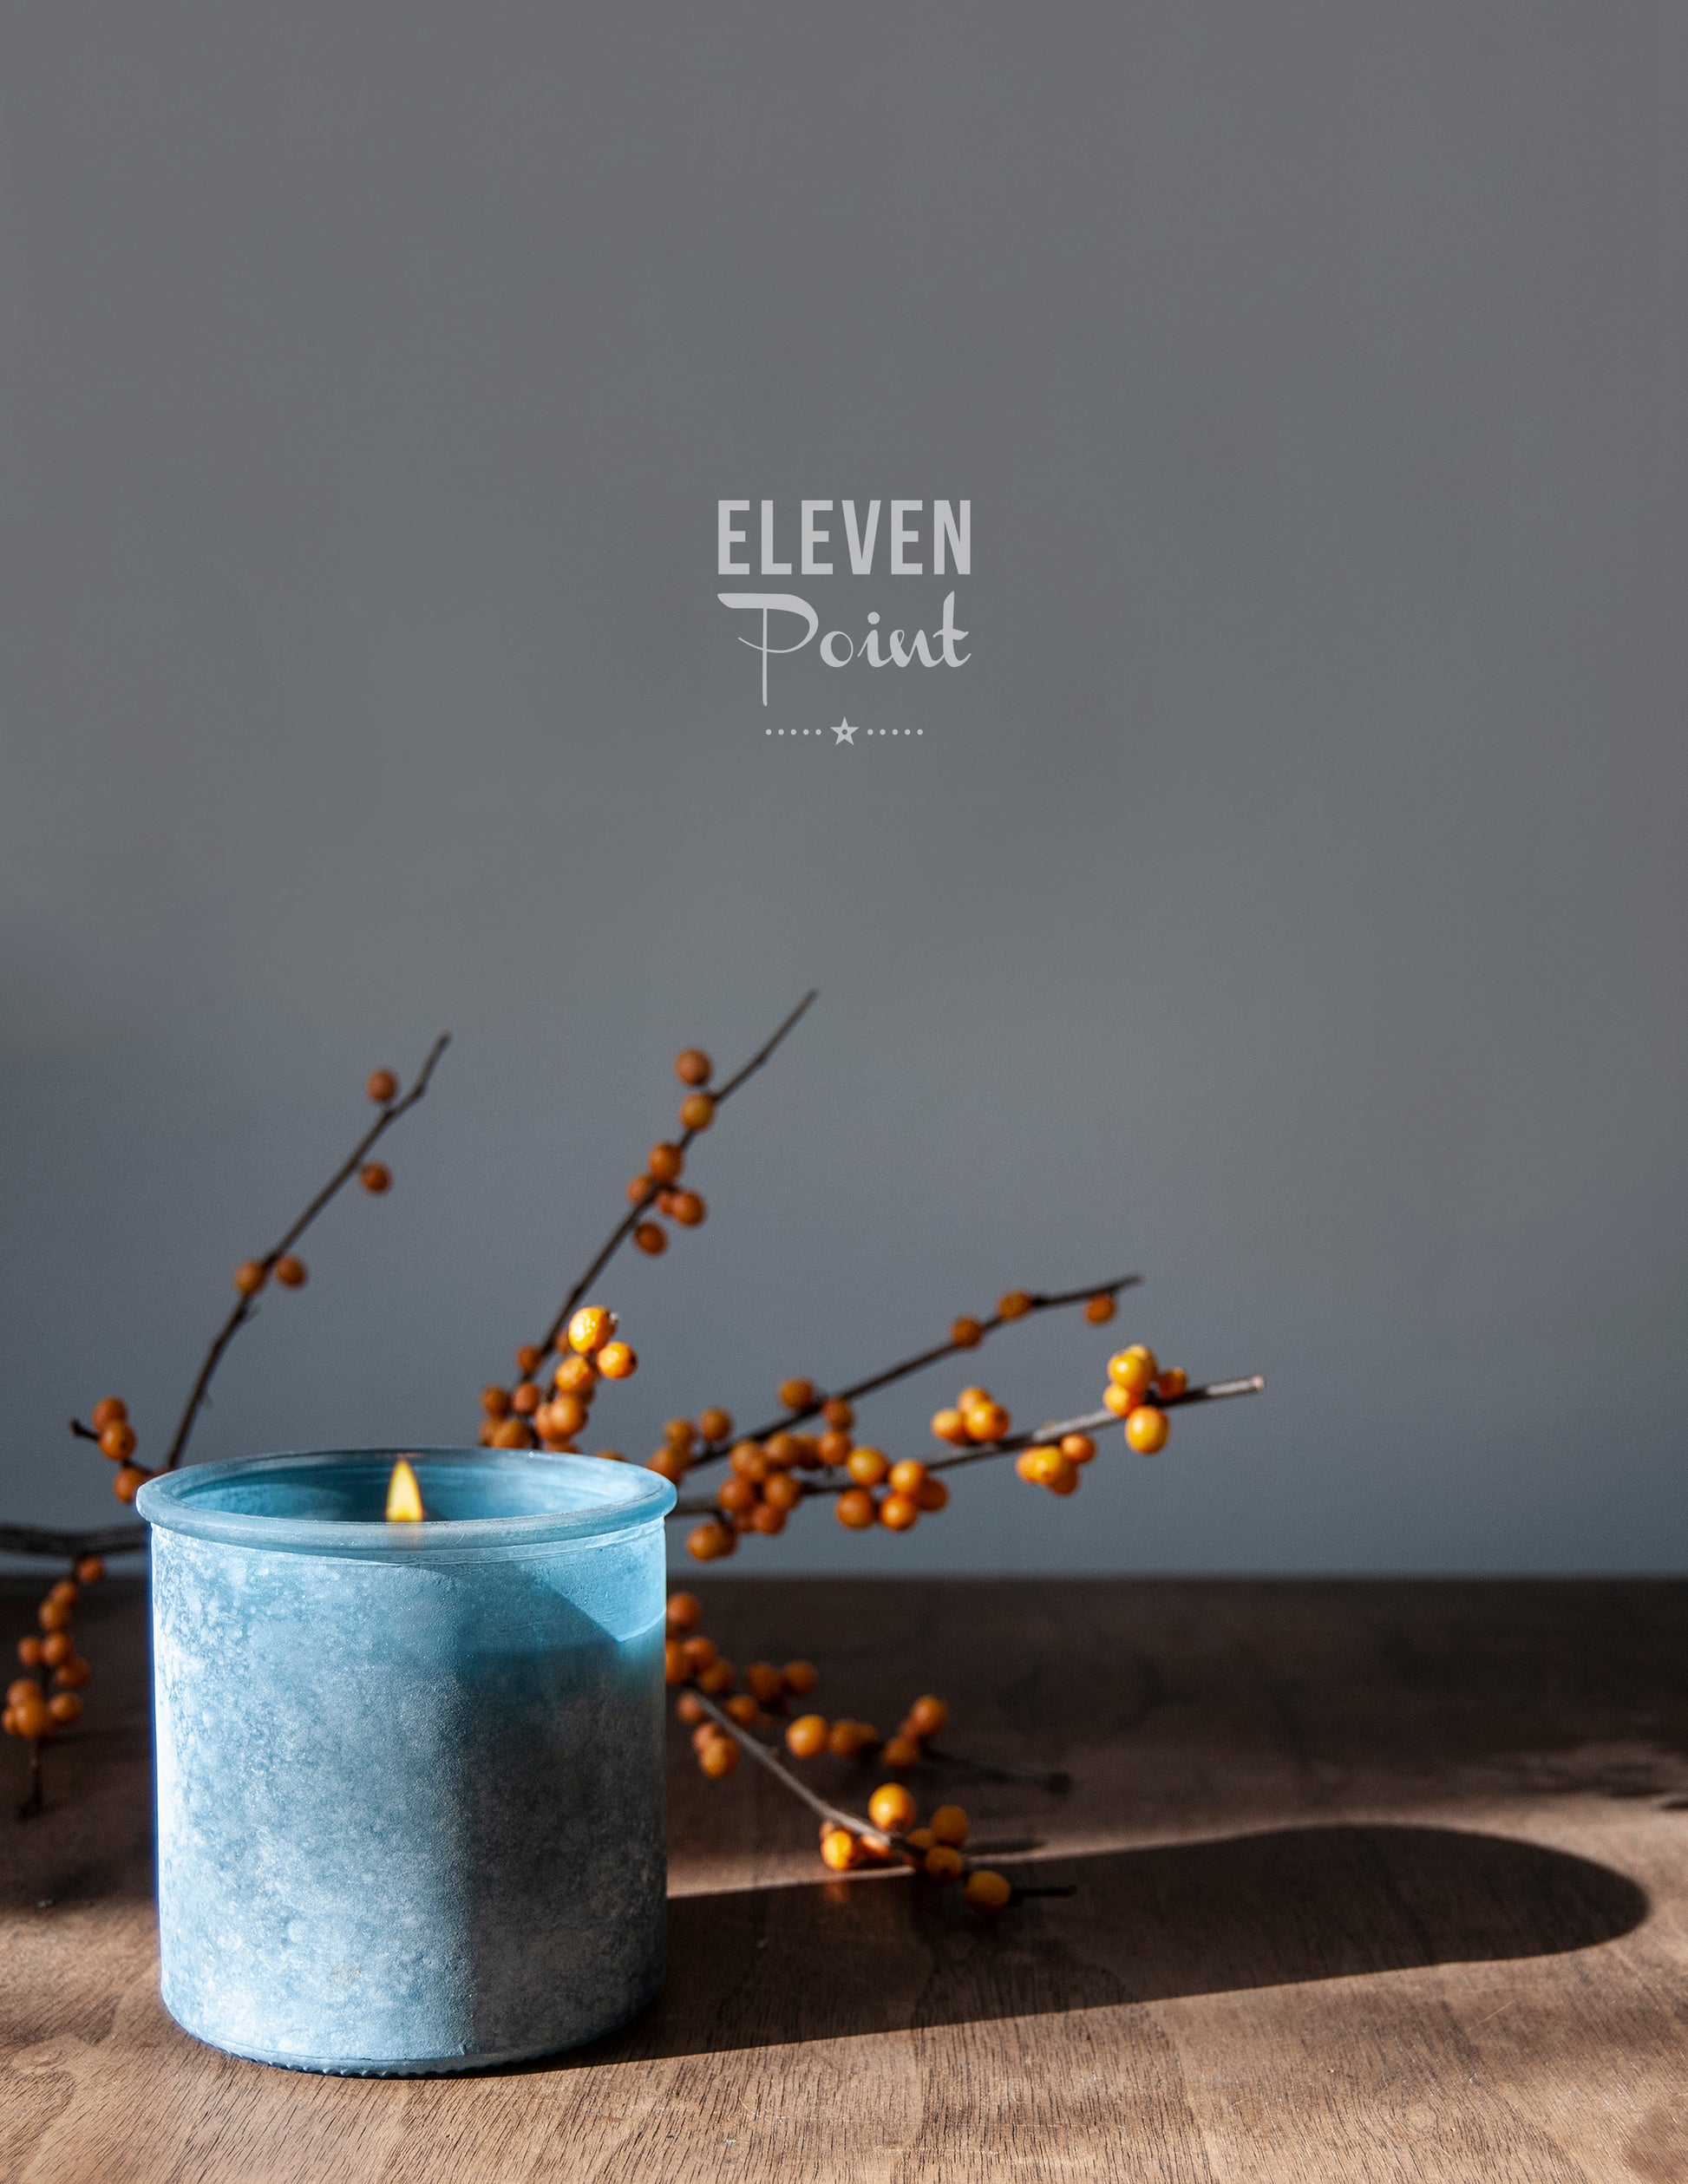 Arrow River Rock Candle in Denim Candle Eleven Point   